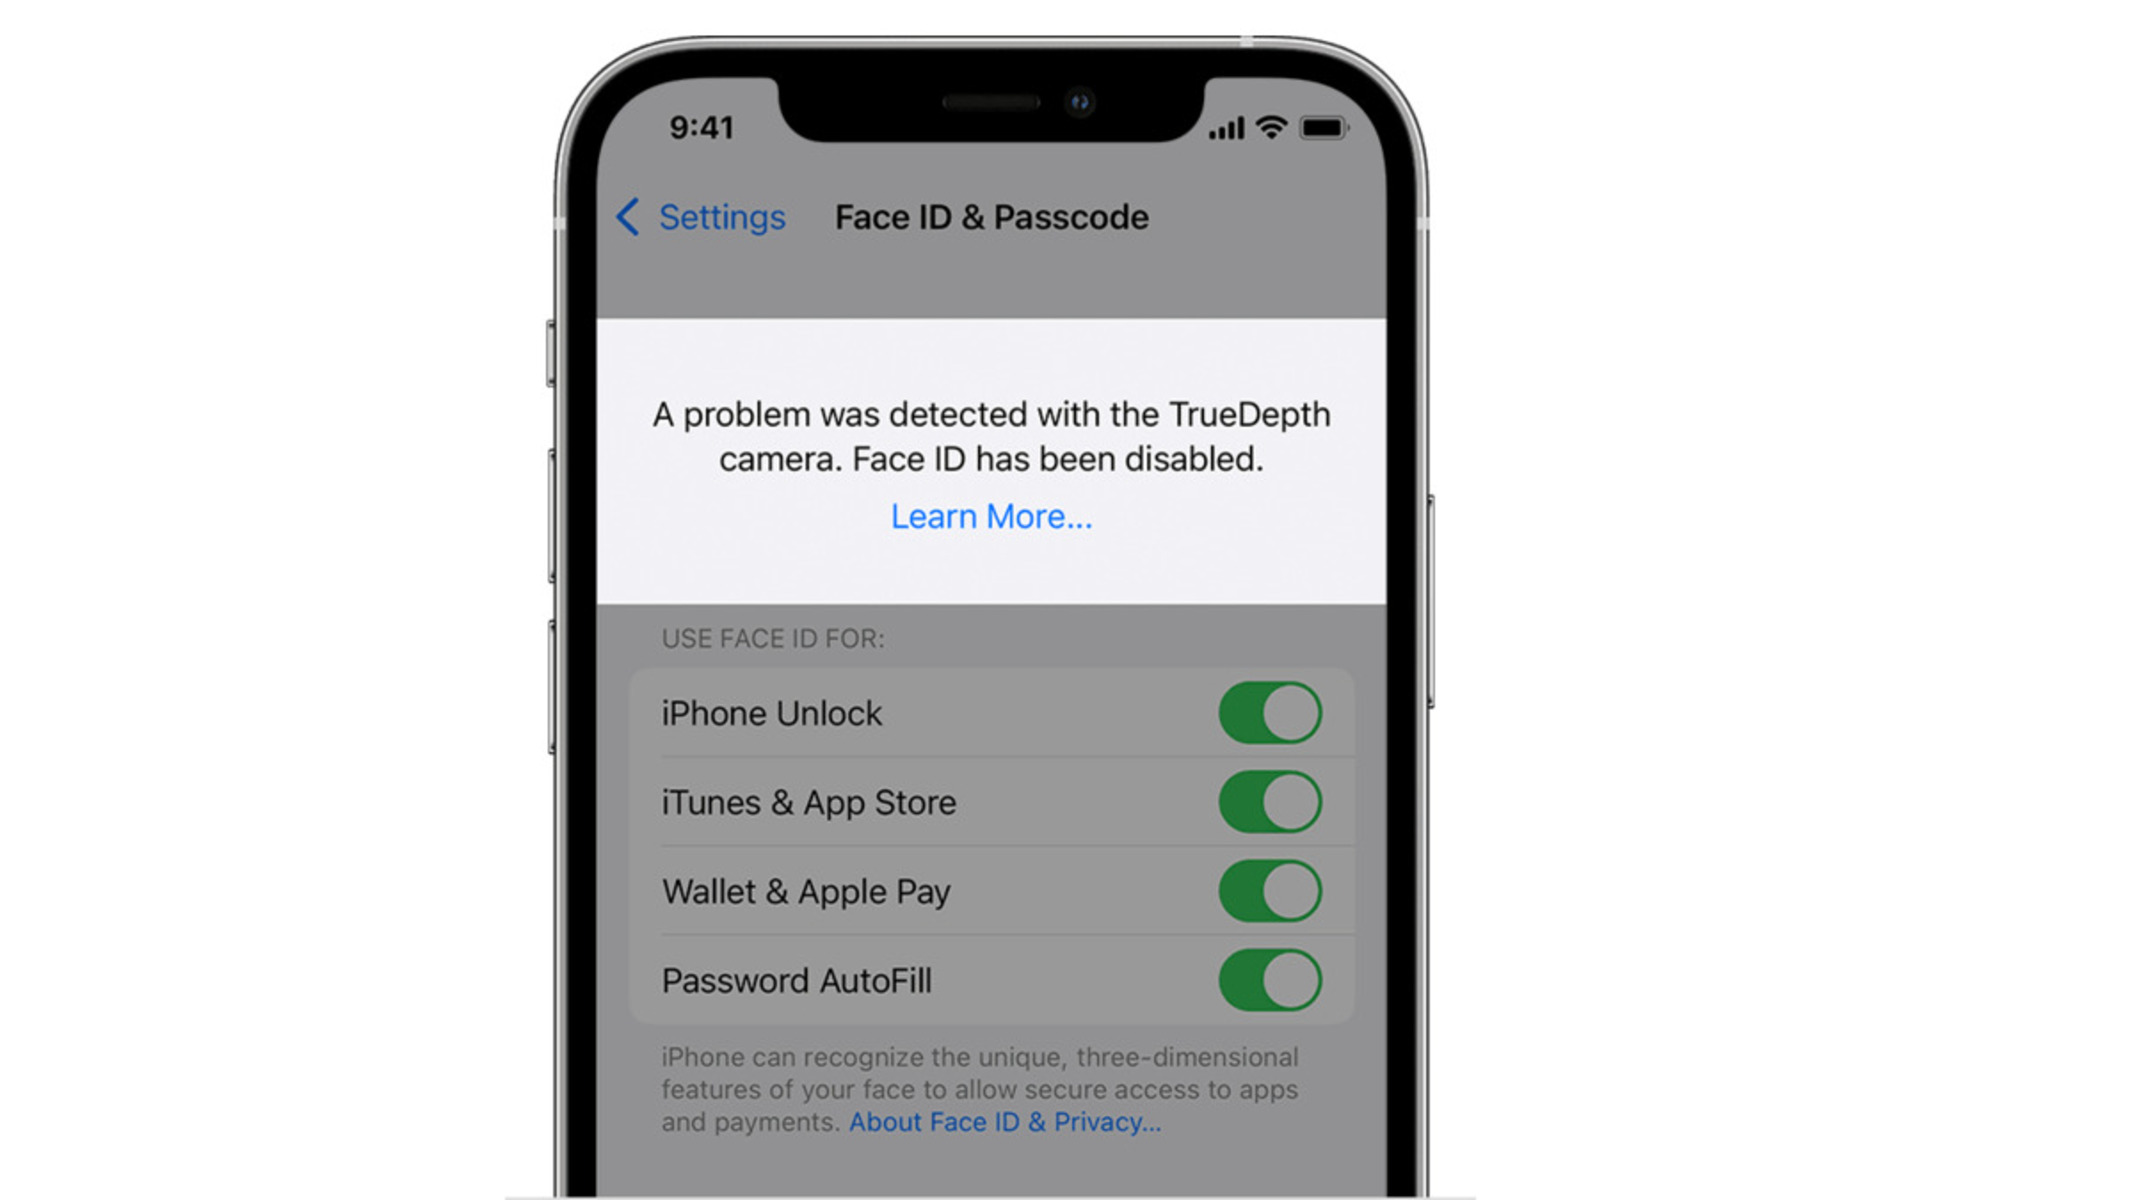 face-id-troubleshooting-fixing-face-id-issues-on-iphone-12